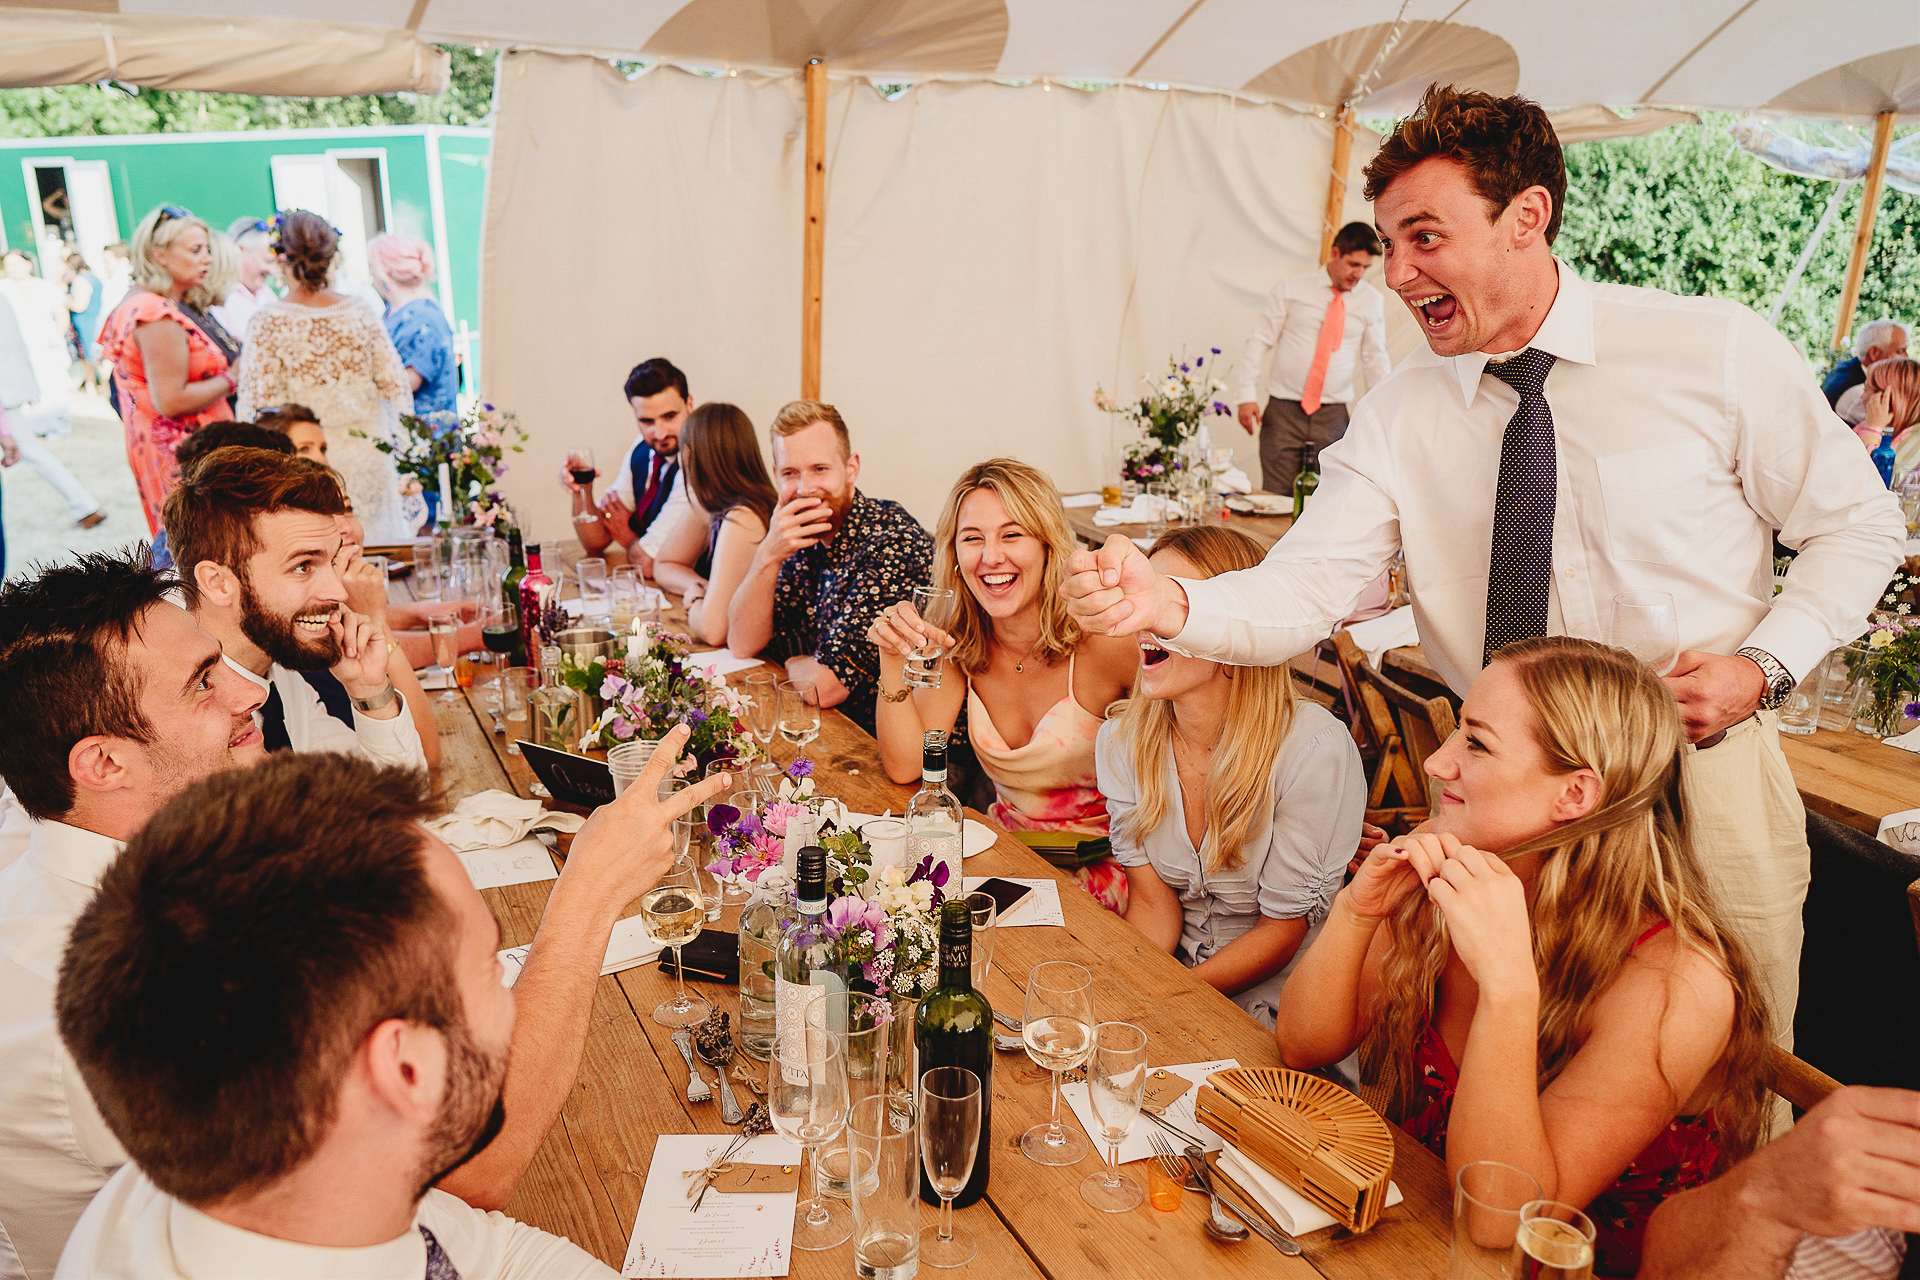 Wedding guests laughing in a marquee